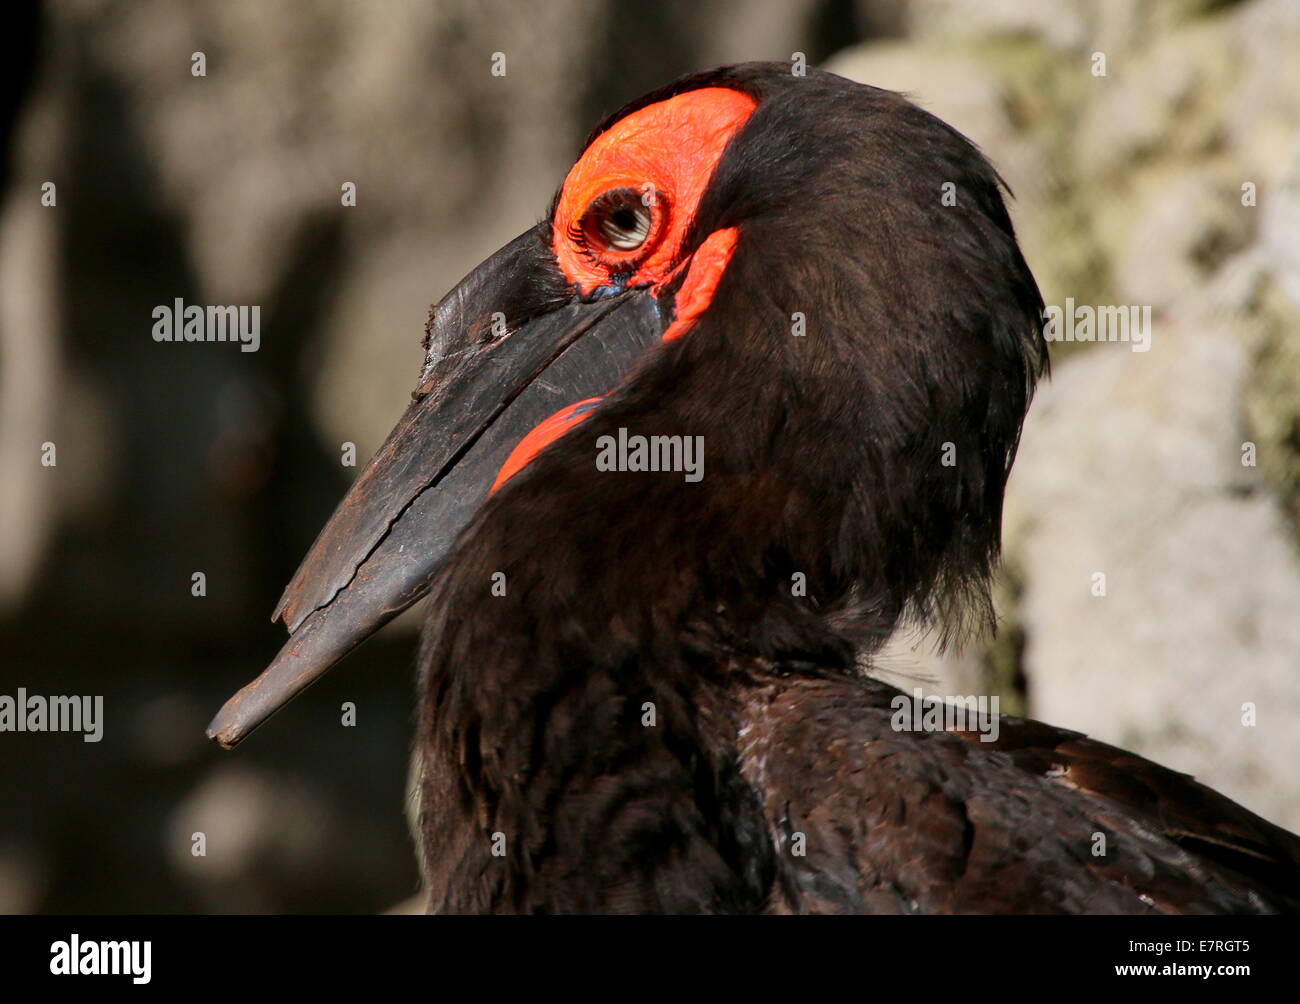 Southern ground hornbill (Bucorvus leadbeateri, formerly B. Cafer) close-up of the head Stock Photo